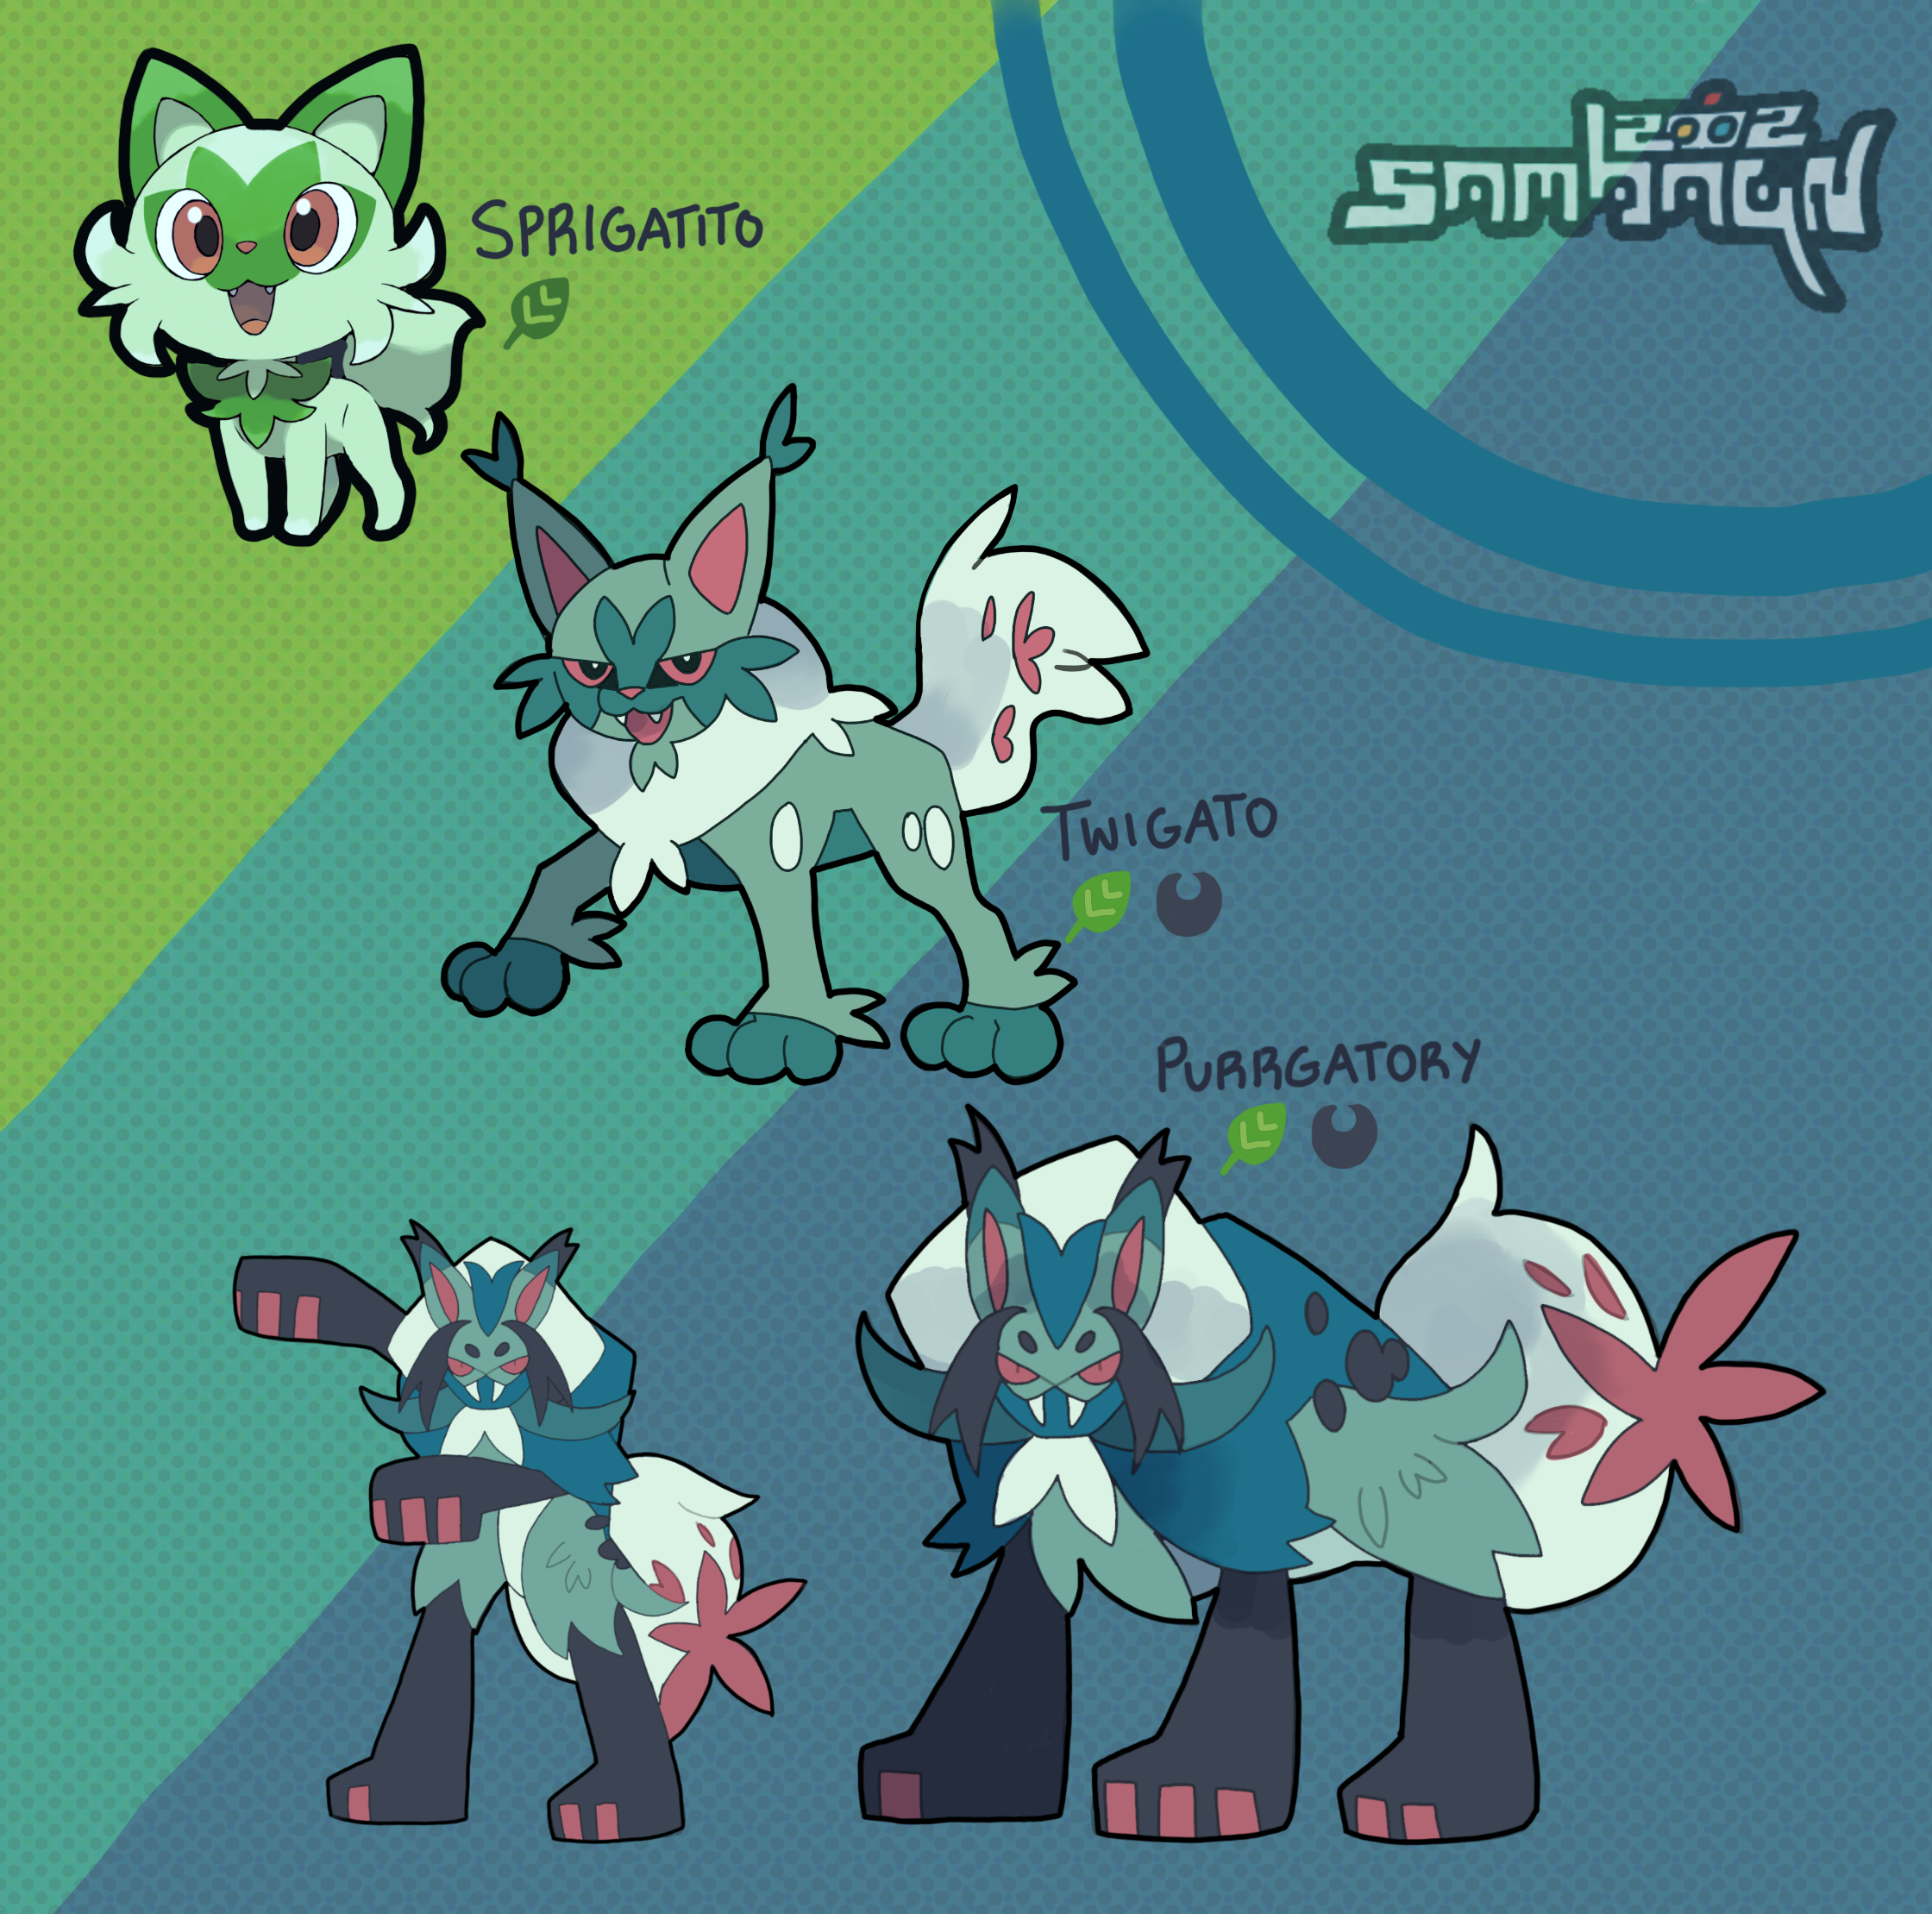 I created these designs before the real evolutions of the pokemon Sprigatito were revealed. I expanded its grass-type cat motif into a grass/dark Iberian lynx. Done in 2022.